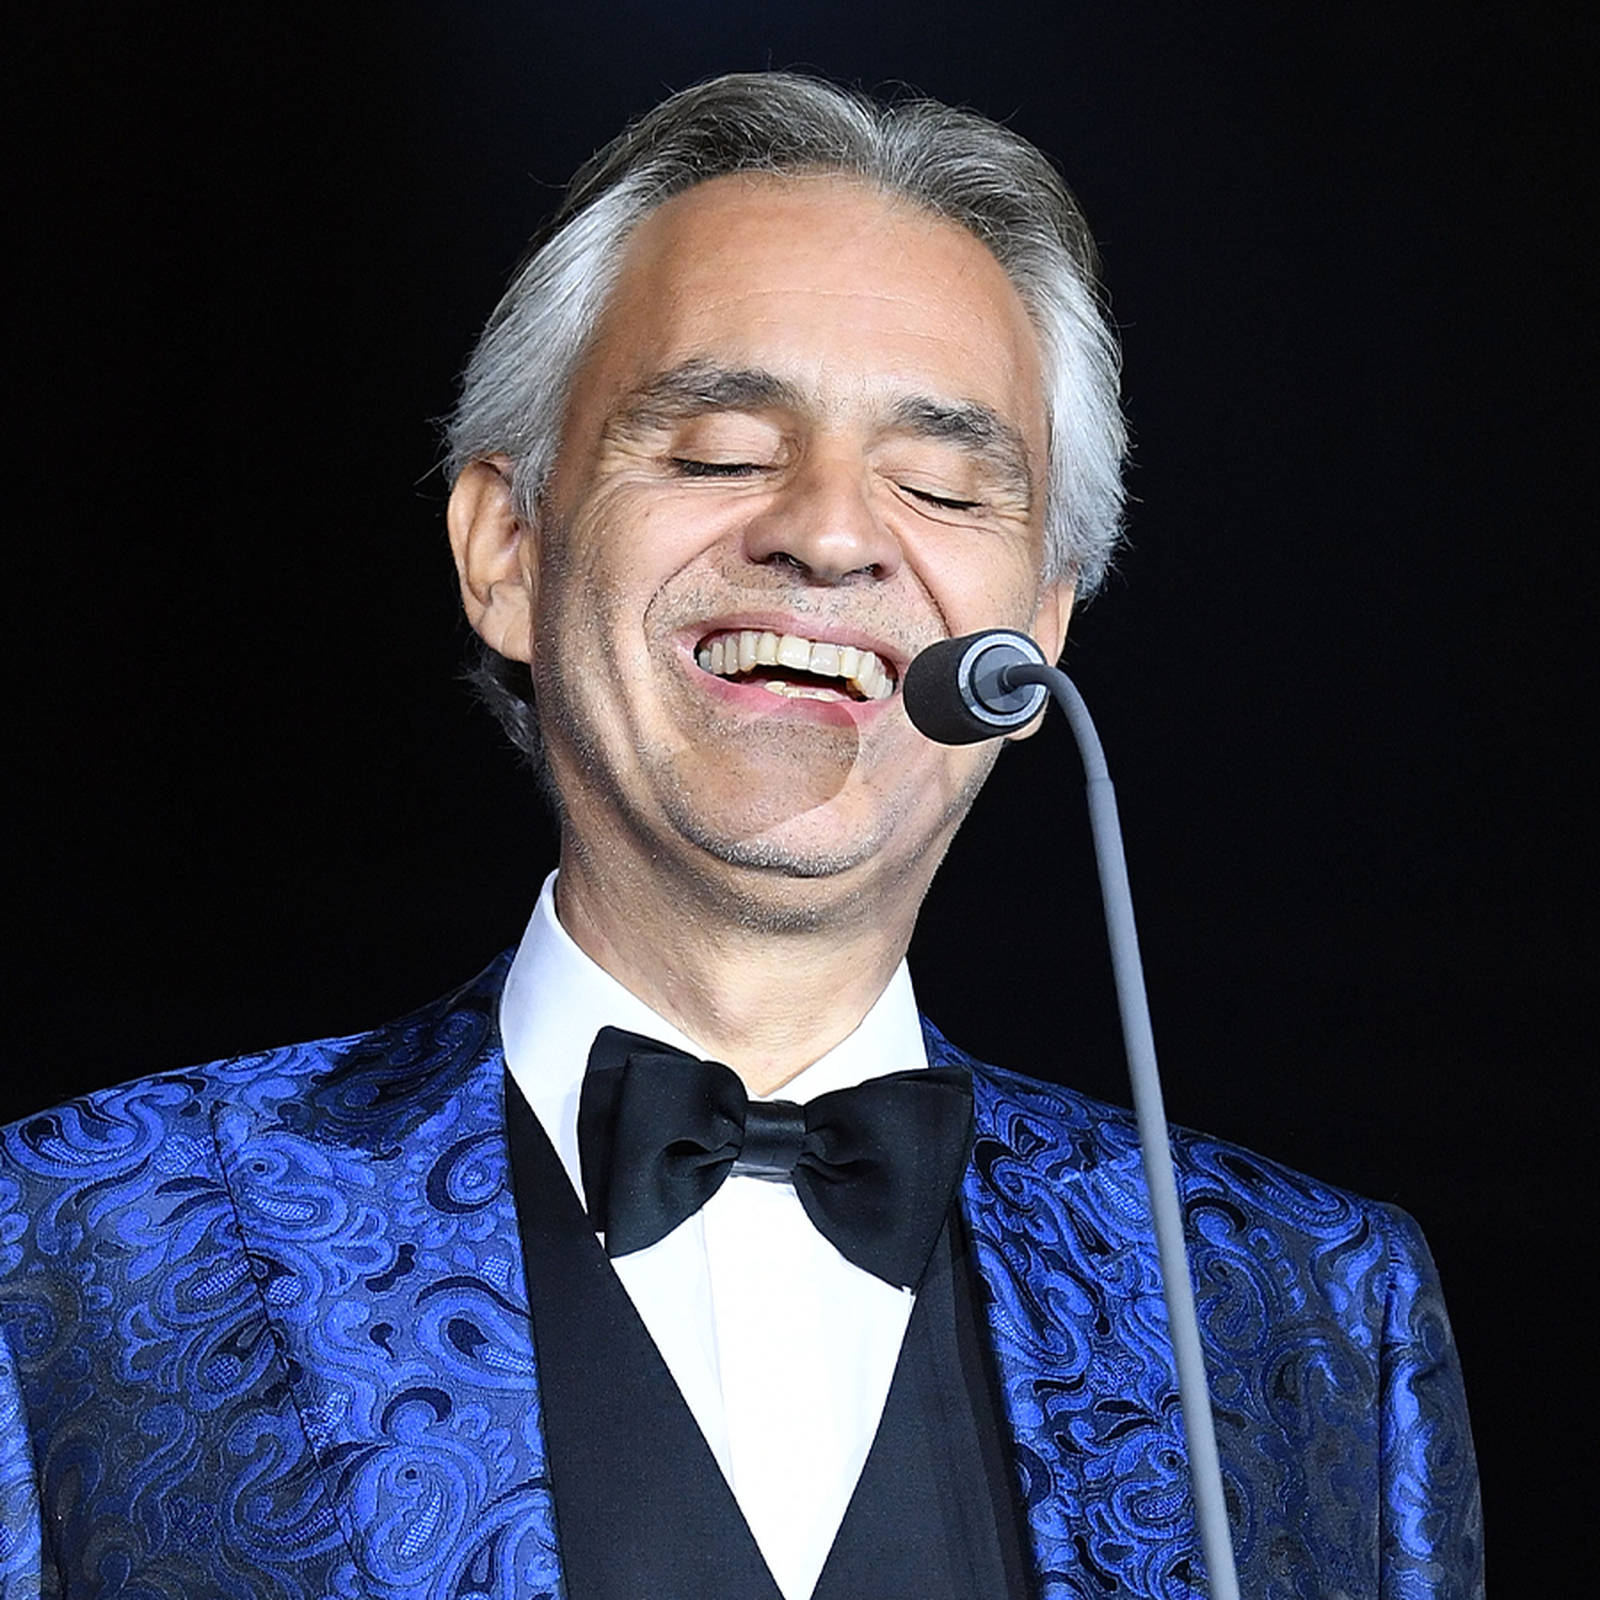 Andrea Bocelli Illness Is He Sick? Health Condition And Age Revealed